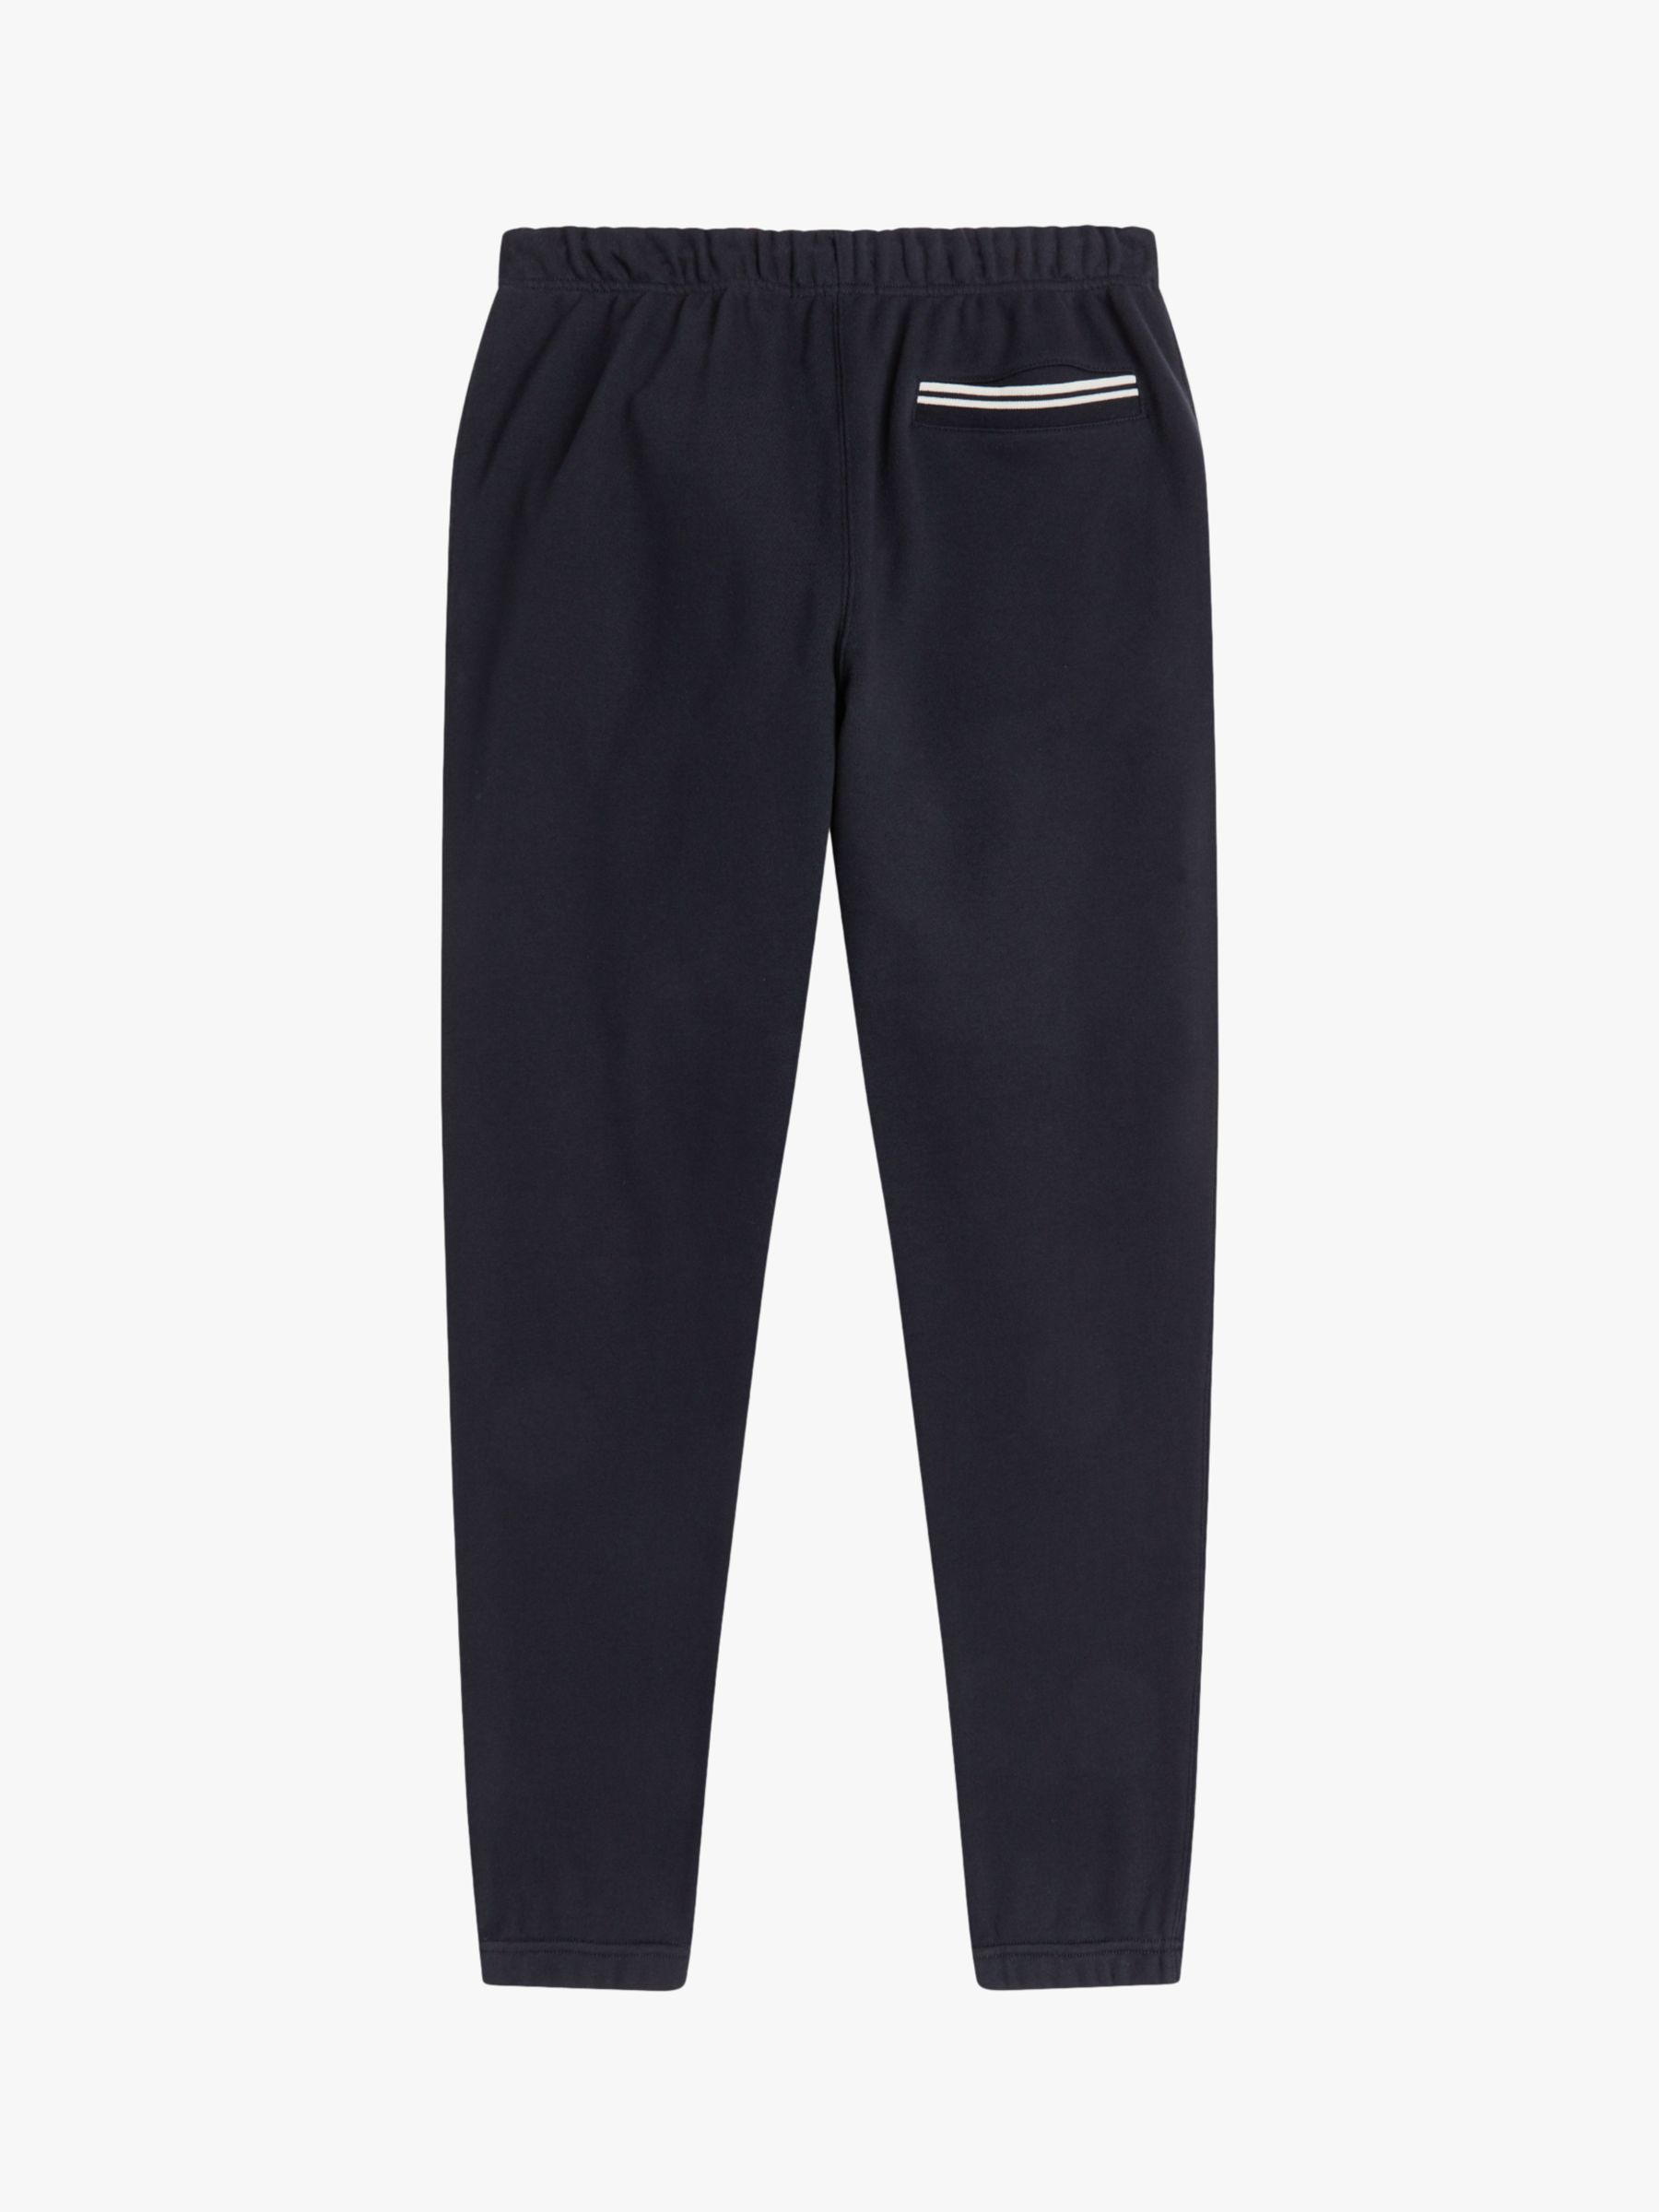 Fred Perry Cotton Blend Sweatpants, Navy at John Lewis & Partners